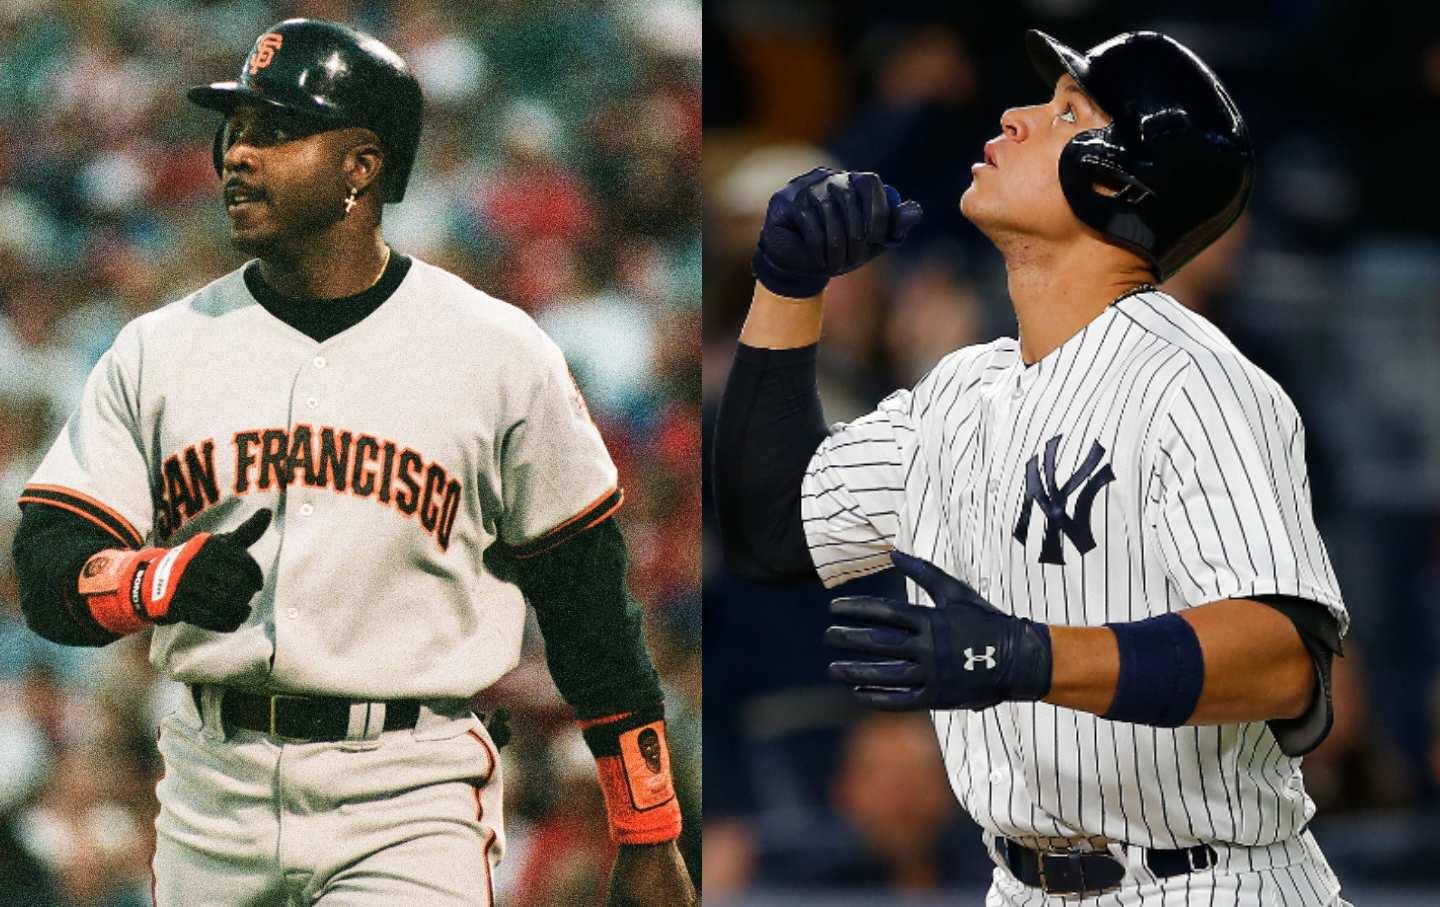 San Francisco Giants player Barry Bonds in 1997, and New York Yankees player Aaron Judge in 2017.